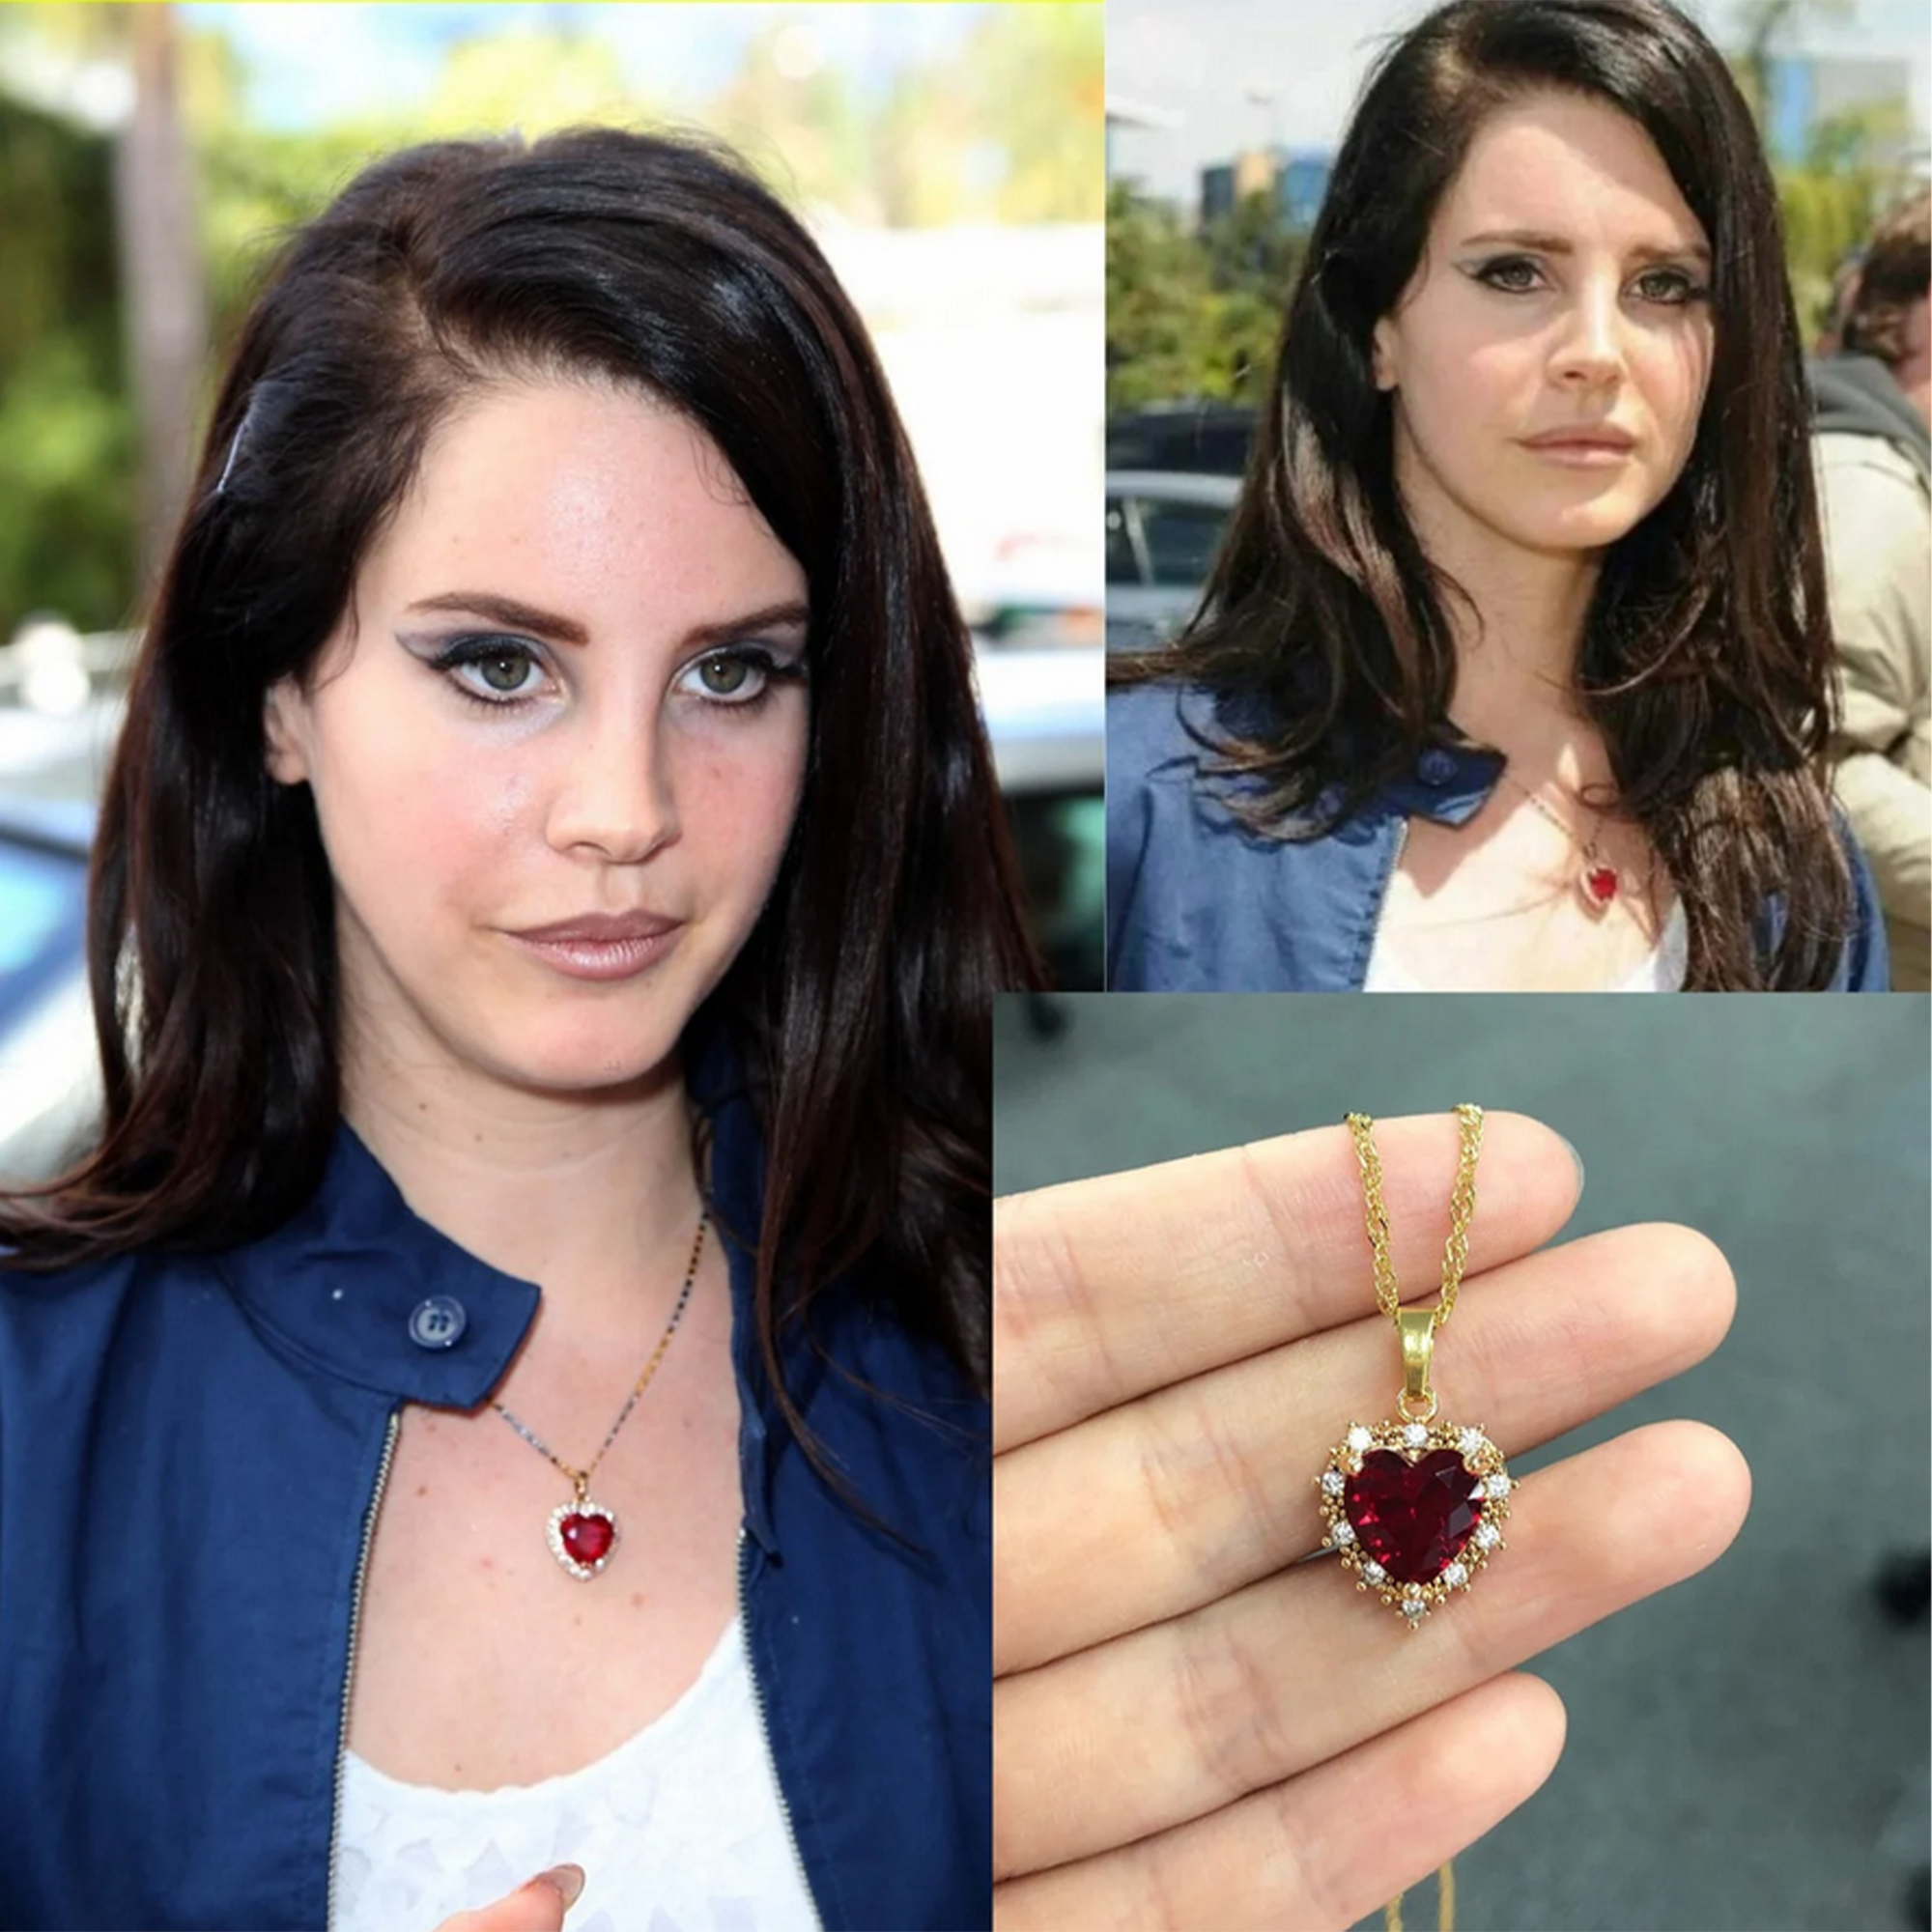 Ldr Lana Style Heart Necklace